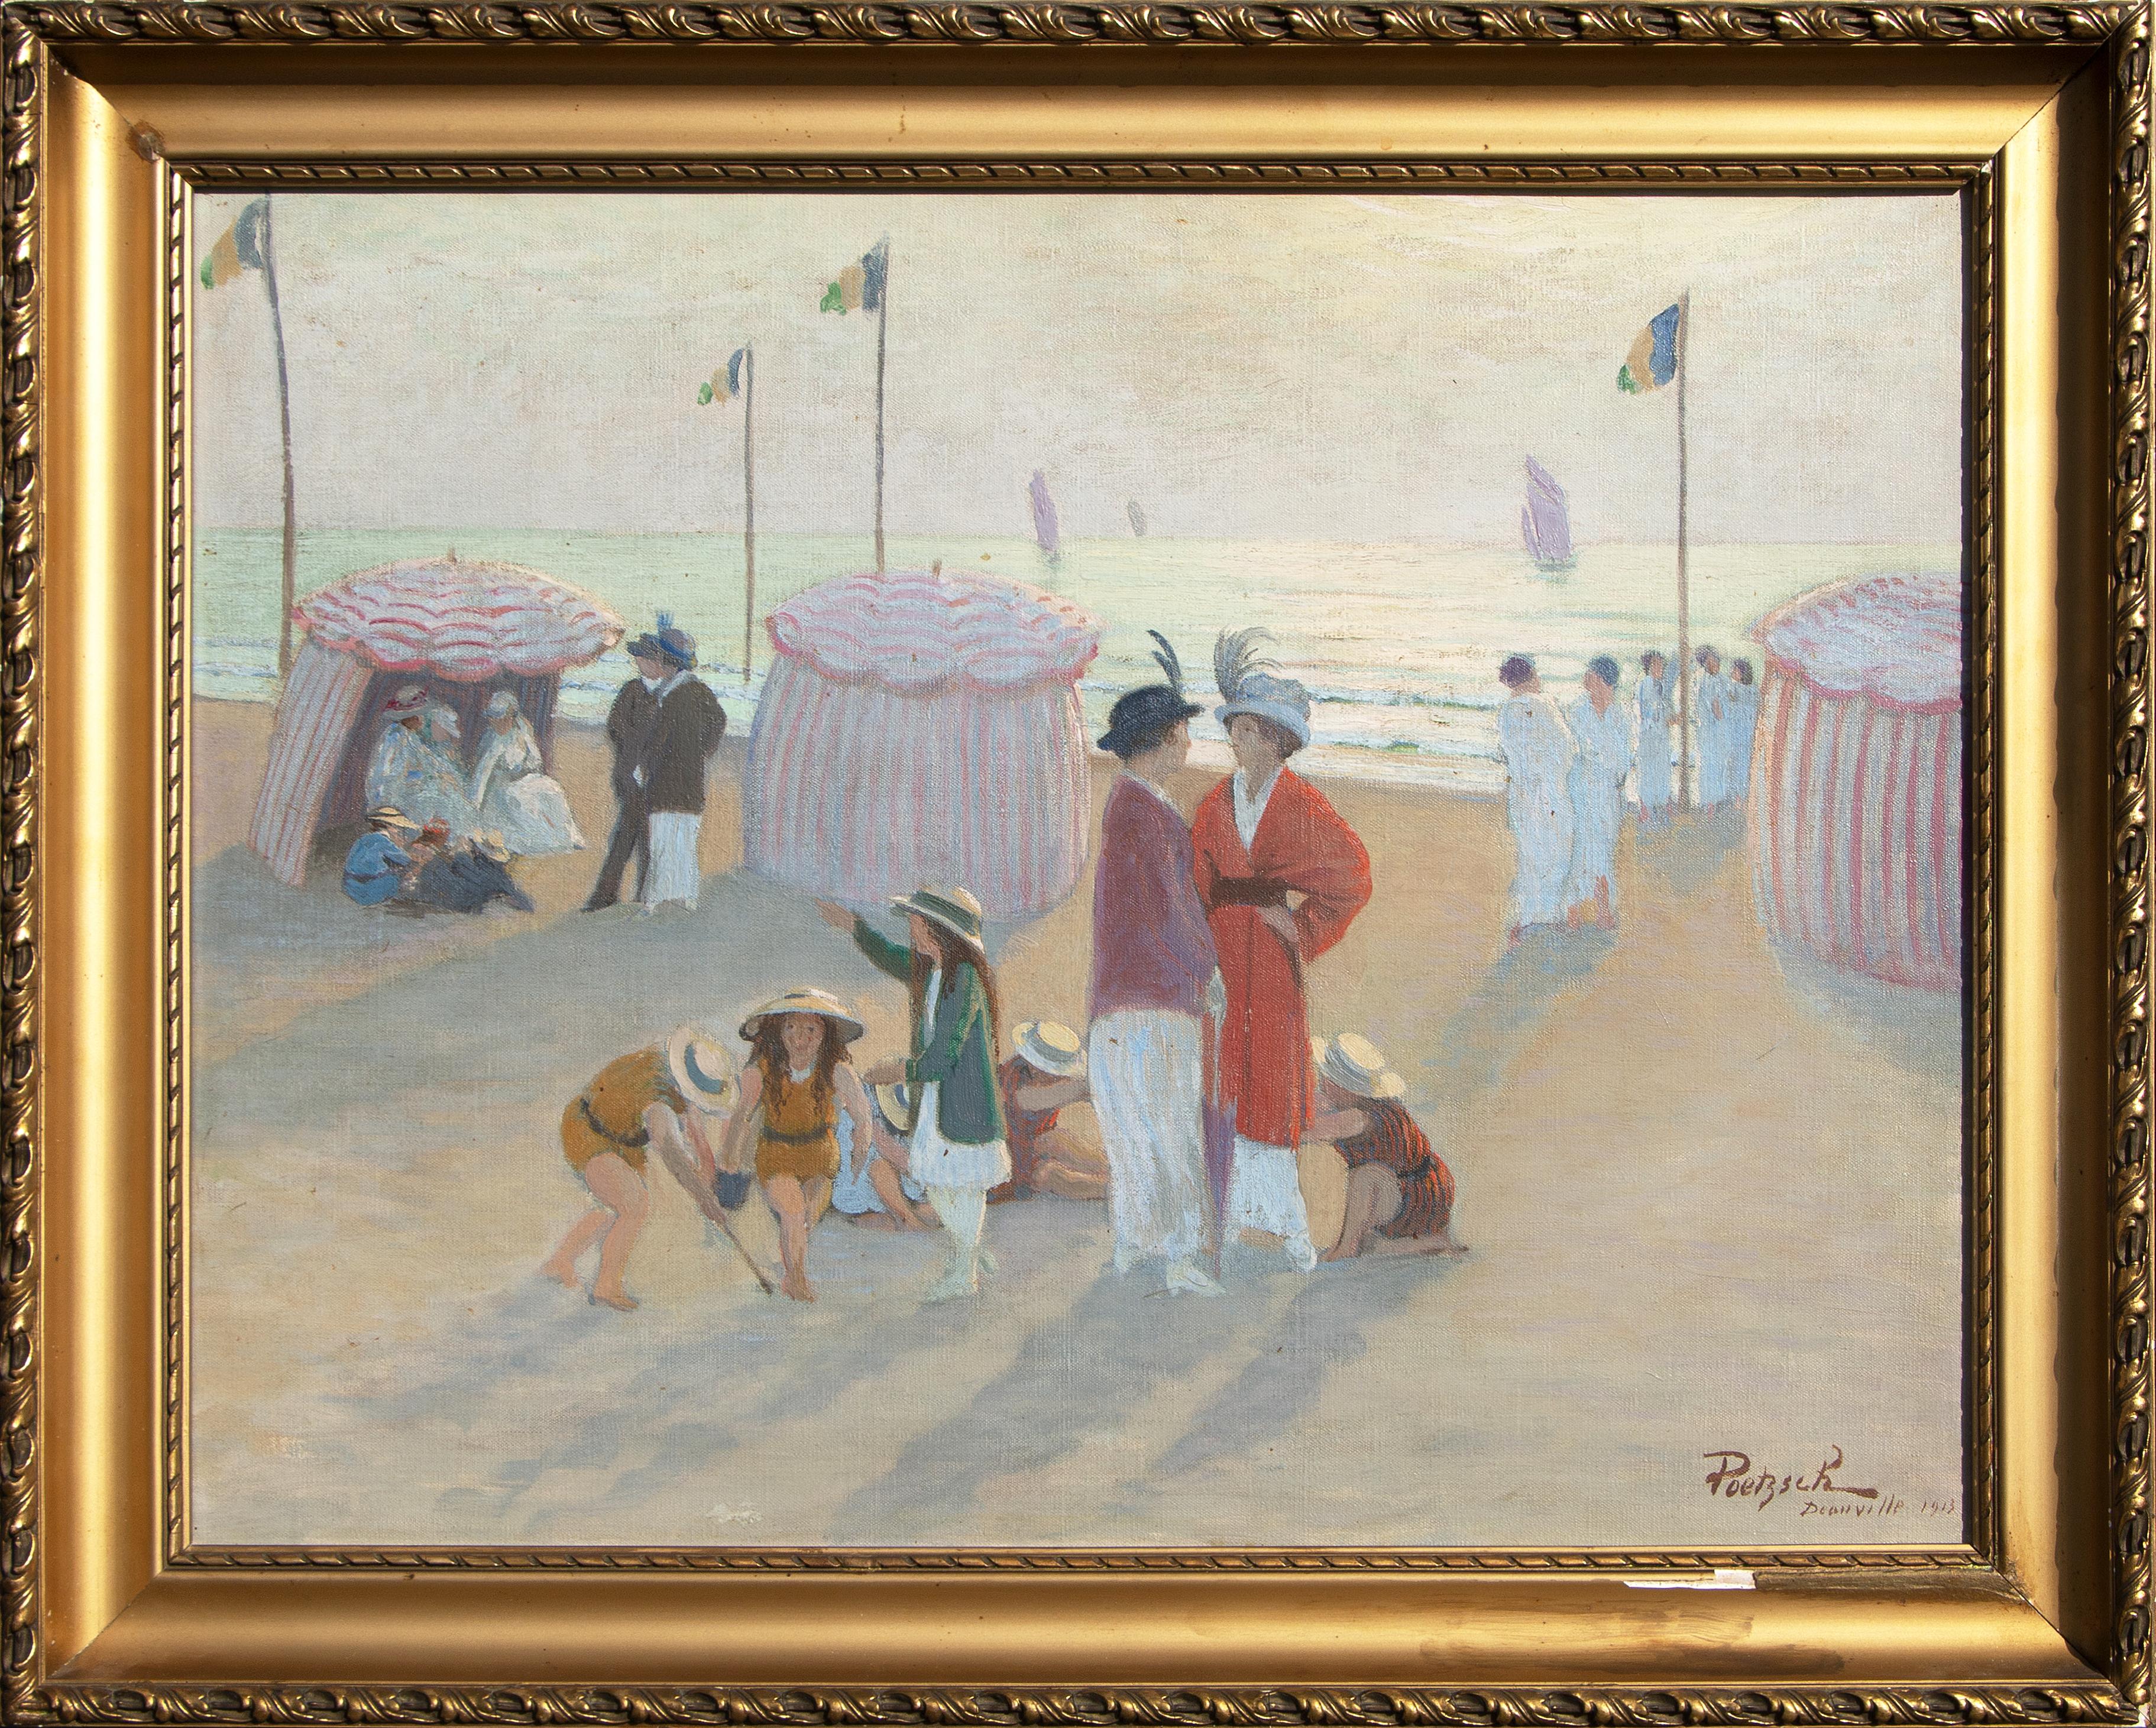 This is a beach scene painted by the Swiss Belle Epoque painter Gustave Poetzsch.  It is a scene from Deauville featuring two ladies in the center with a group of children surrounding them.  There are bright reds, greens and oranges in the subjects'